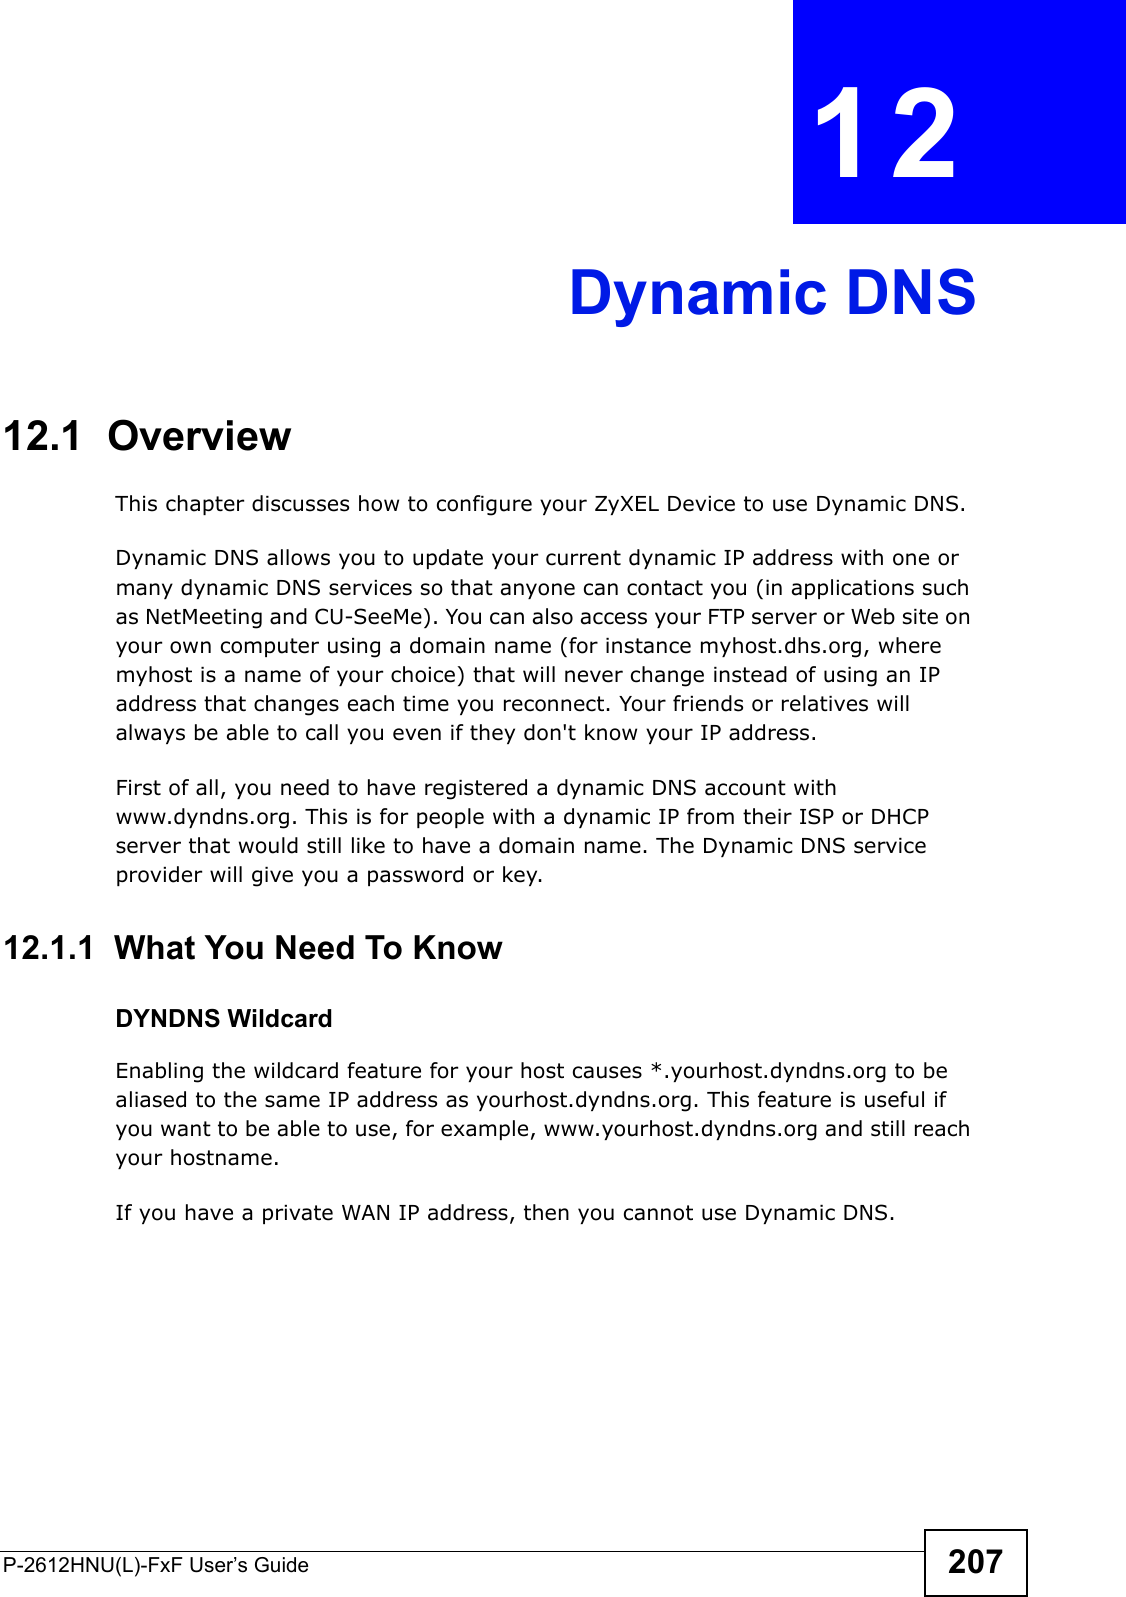 P-2612HNU(L)-FxF User’s Guide 207CHAPTER   12 Dynamic DNS12.1  Overview This chapter discusses how to configure your ZyXEL Device to use Dynamic DNS.Dynamic DNS allows you to update your current dynamic IP address with one or many dynamic DNS services so that anyone can contact you (in applications such as NetMeeting and CU-SeeMe). You can also access your FTP server or Web site on your own computer using a domain name (for instance myhost.dhs.org, where myhost is a name of your choice) that will never change instead of using an IP address that changes each time you reconnect. Your friends or relatives will always be able to call you even if they don&apos;t know your IP address.First of all, you need to have registered a dynamic DNS account withwww.dyndns.org. This is for people with a dynamic IP from their ISP or DHCPserver that would still like to have a domain name. The Dynamic DNS service provider will give you a password or key.12.1.1  What You Need To KnowDYNDNS WildcardEnabling the wildcard feature for your host causes *.yourhost.dyndns.org to bealiased to the same IP address as yourhost.dyndns.org. This feature is useful ifyou want to be able to use, for example, www.yourhost.dyndns.org and still reach your hostname.If you have a private WAN IP address, then you cannot use Dynamic DNS.